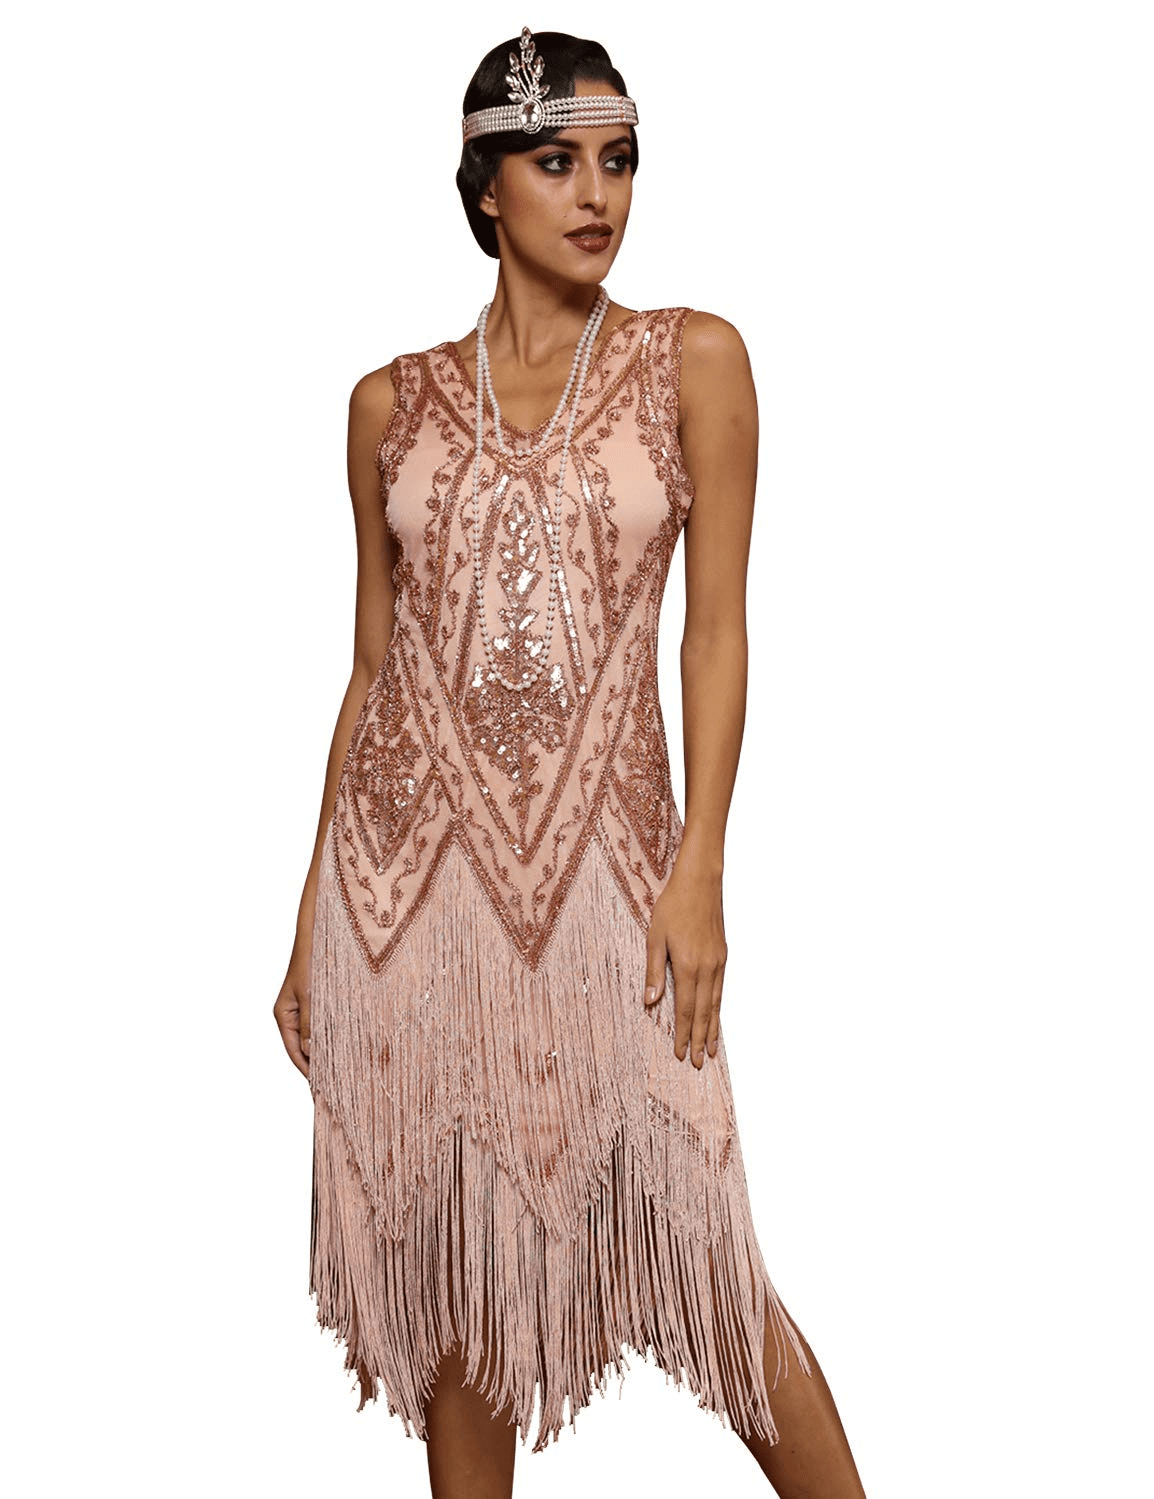 CHARLESTON FLAPPER GATSBY 1920 STRAPPY SEQUIN CALF LENGTH COCKTAIL DRESS NEW 